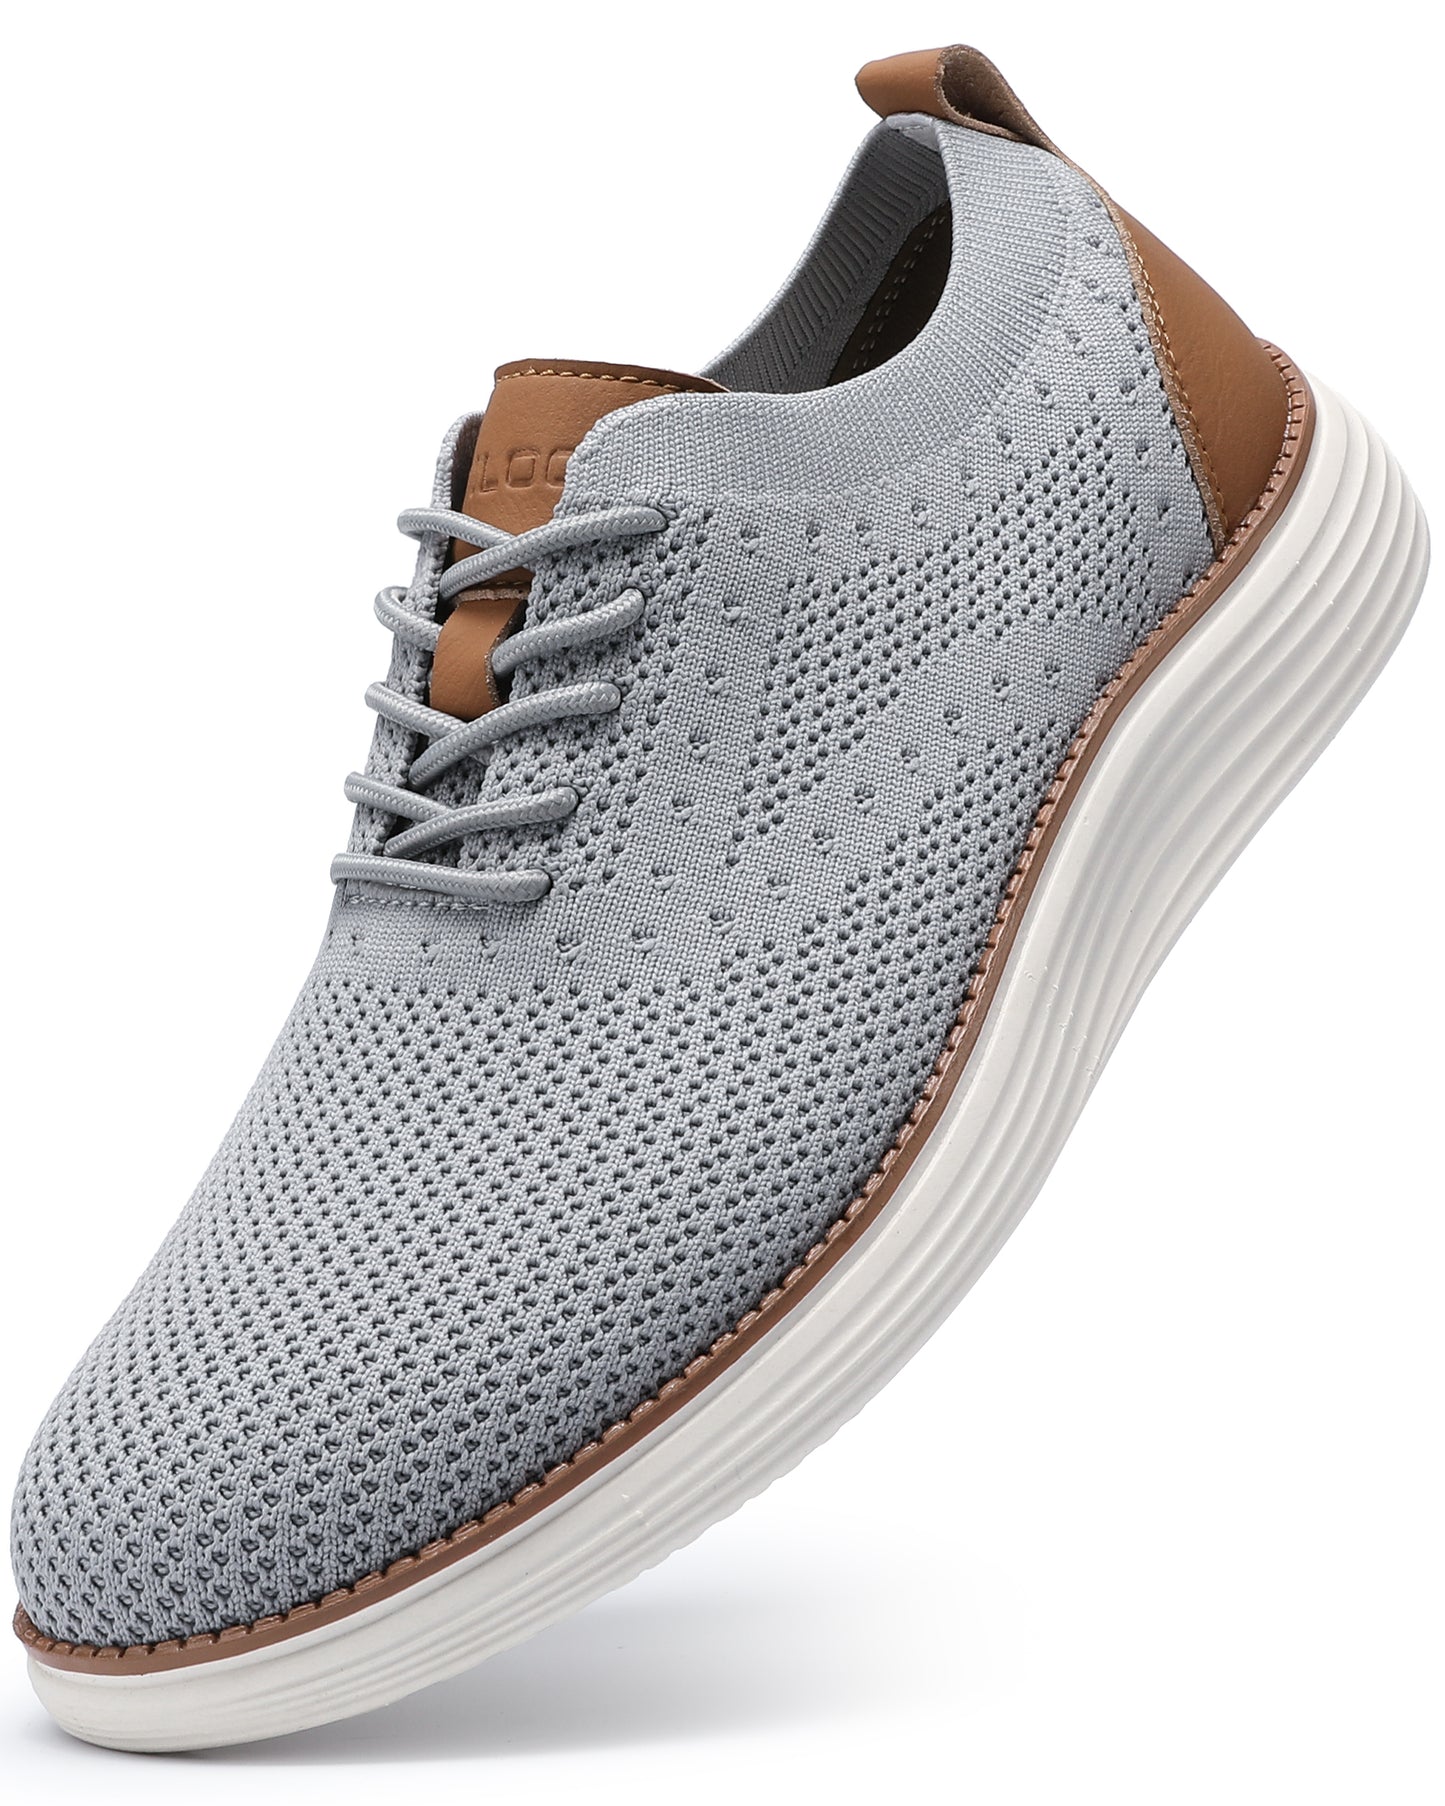 Men's Walking Shoes Mesh Oxfords Business Casual Tennis Comfortable Sneakers